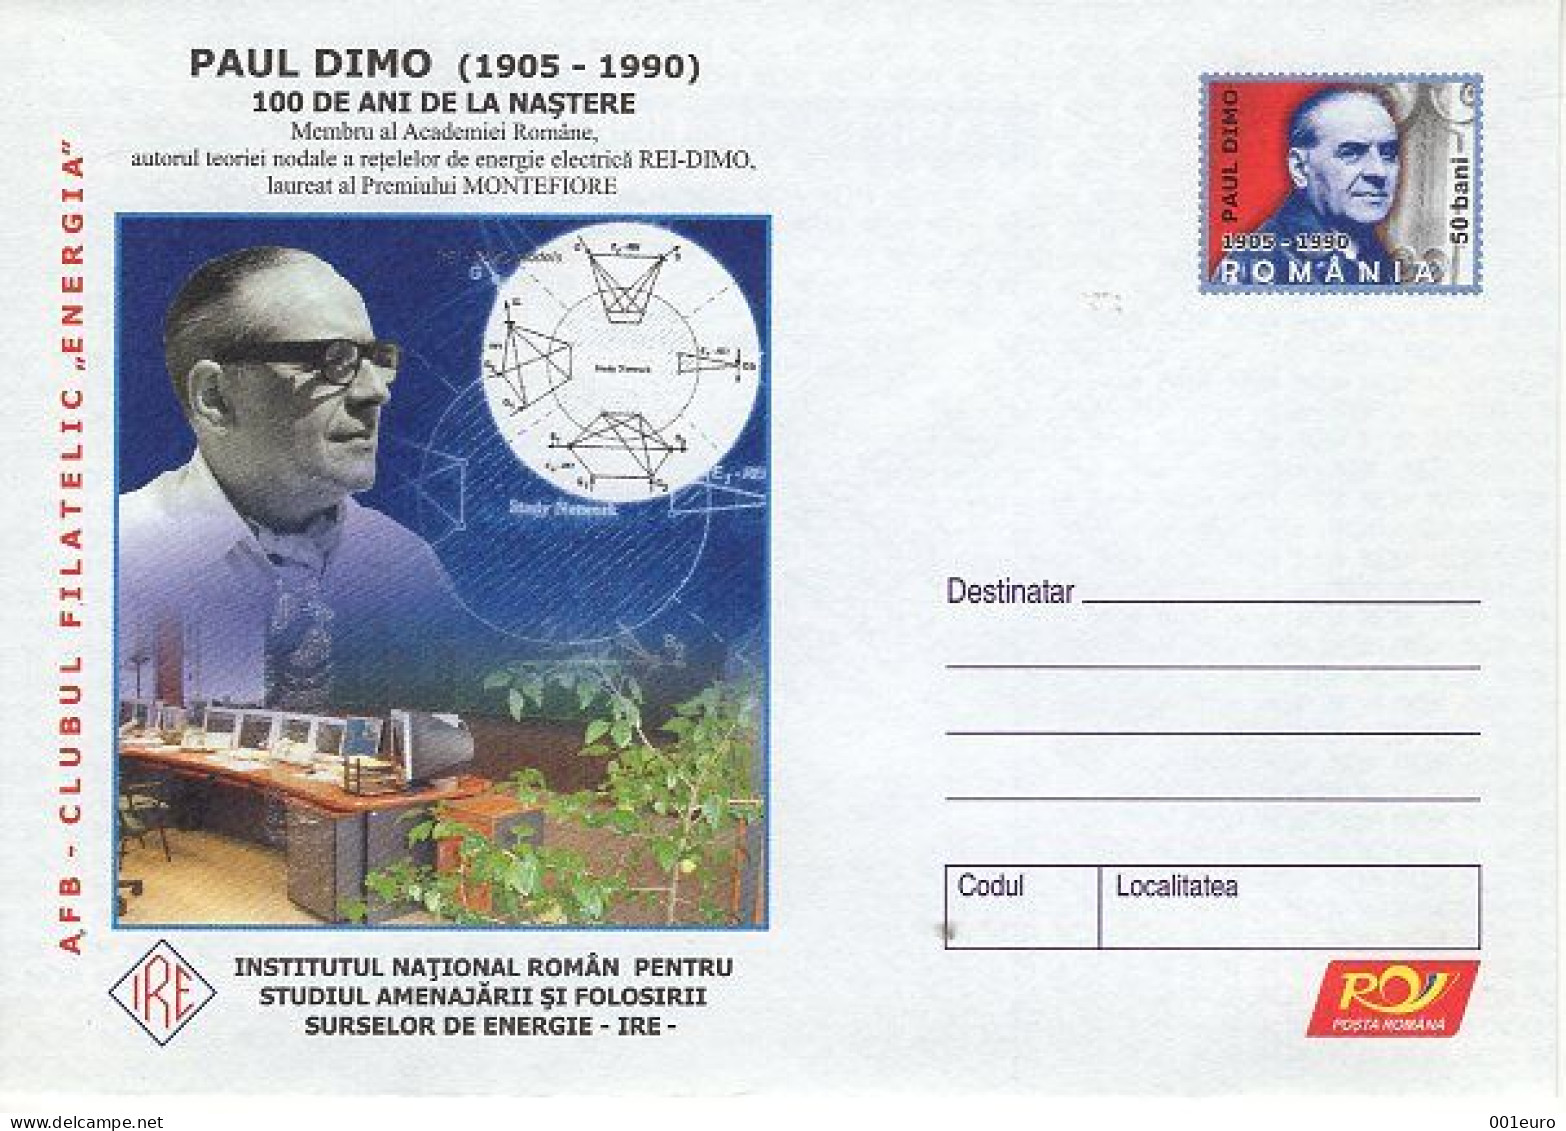 ROMANIA 066y2005: Paul Dimo, Energy & Computers, Unused Prepaid Postal Stationery Cover - Registered Shipping! - Entiers Postaux